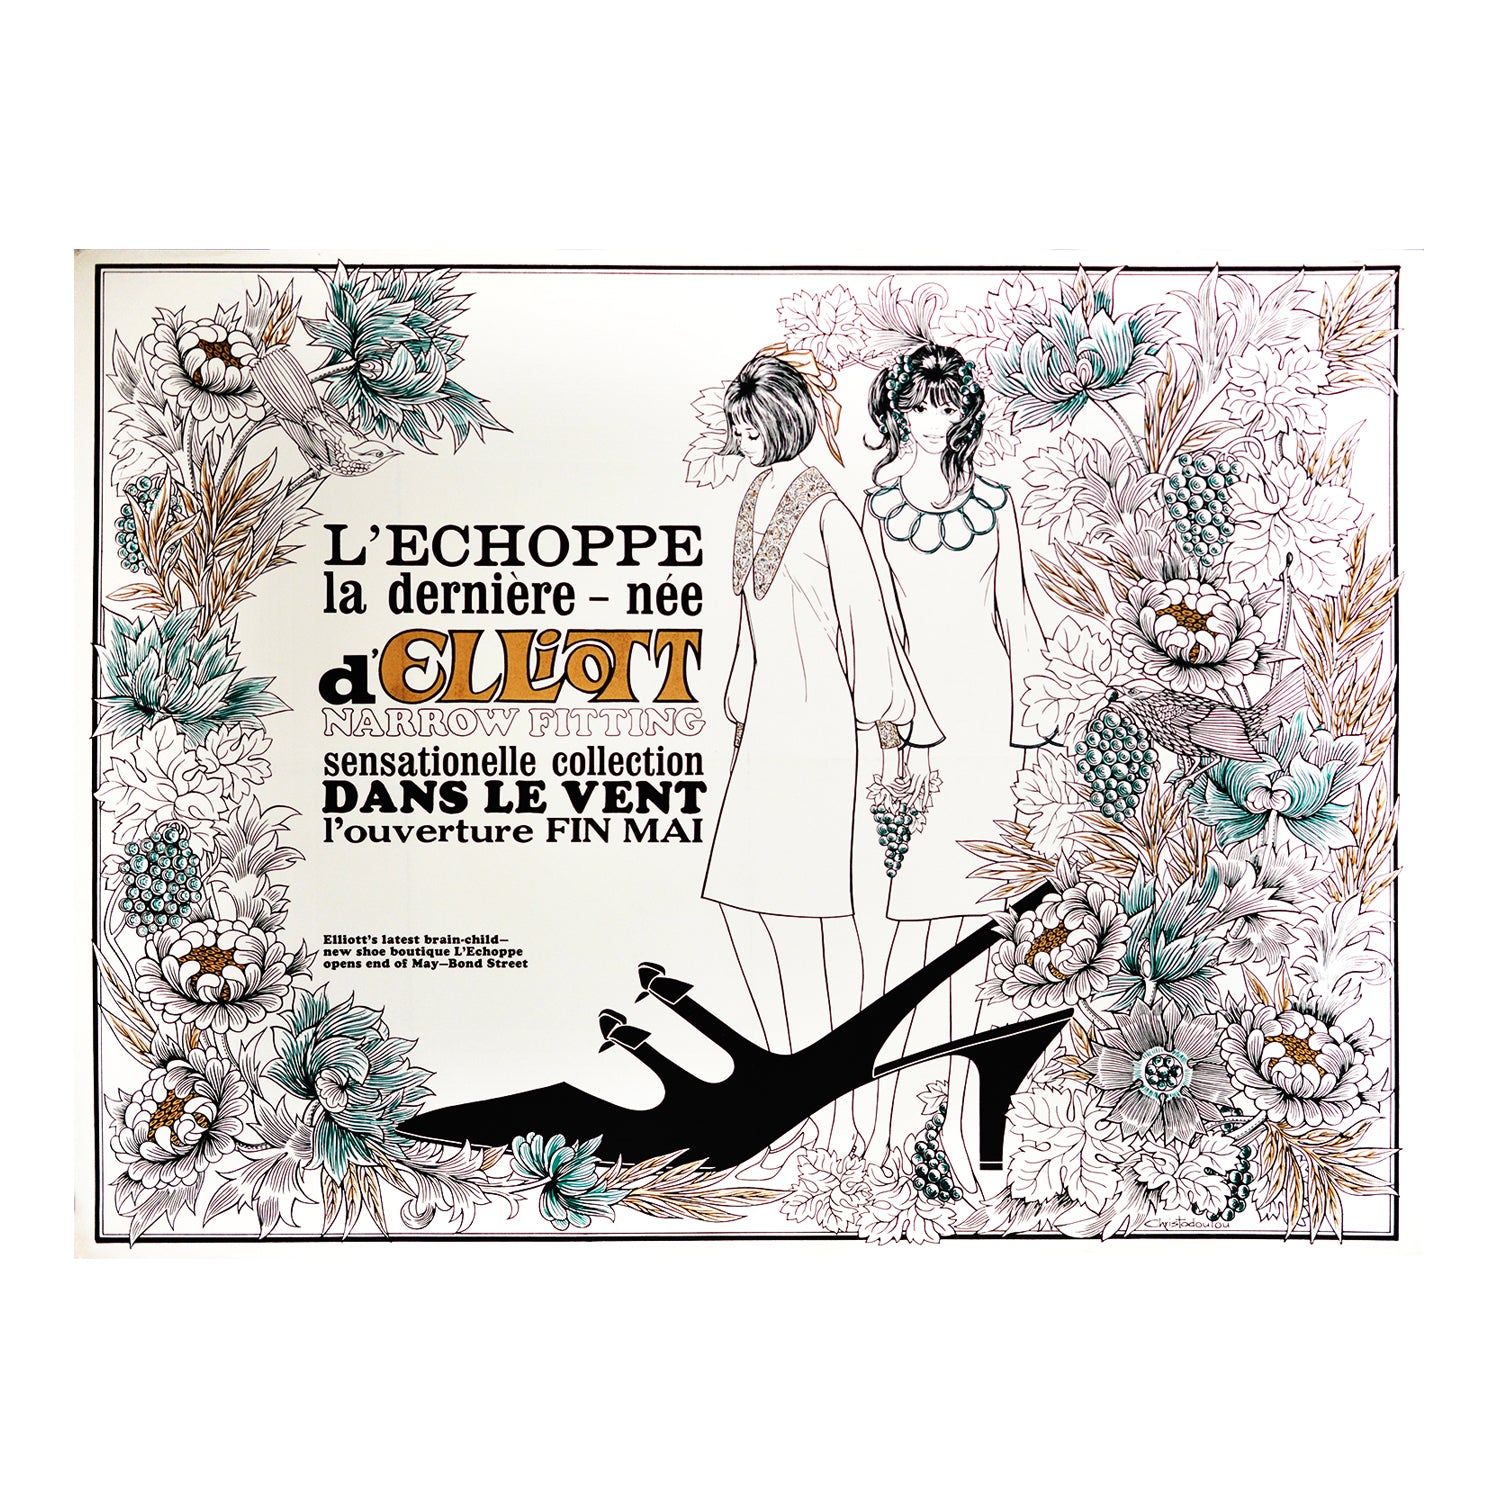 An original marketing poster: L'Echoppe la Derniere (Elliott) designed by Paul Christodoulou in 1963. The image depicts two young women surrounded by flowers and a large block print of a slip-on shoe. 